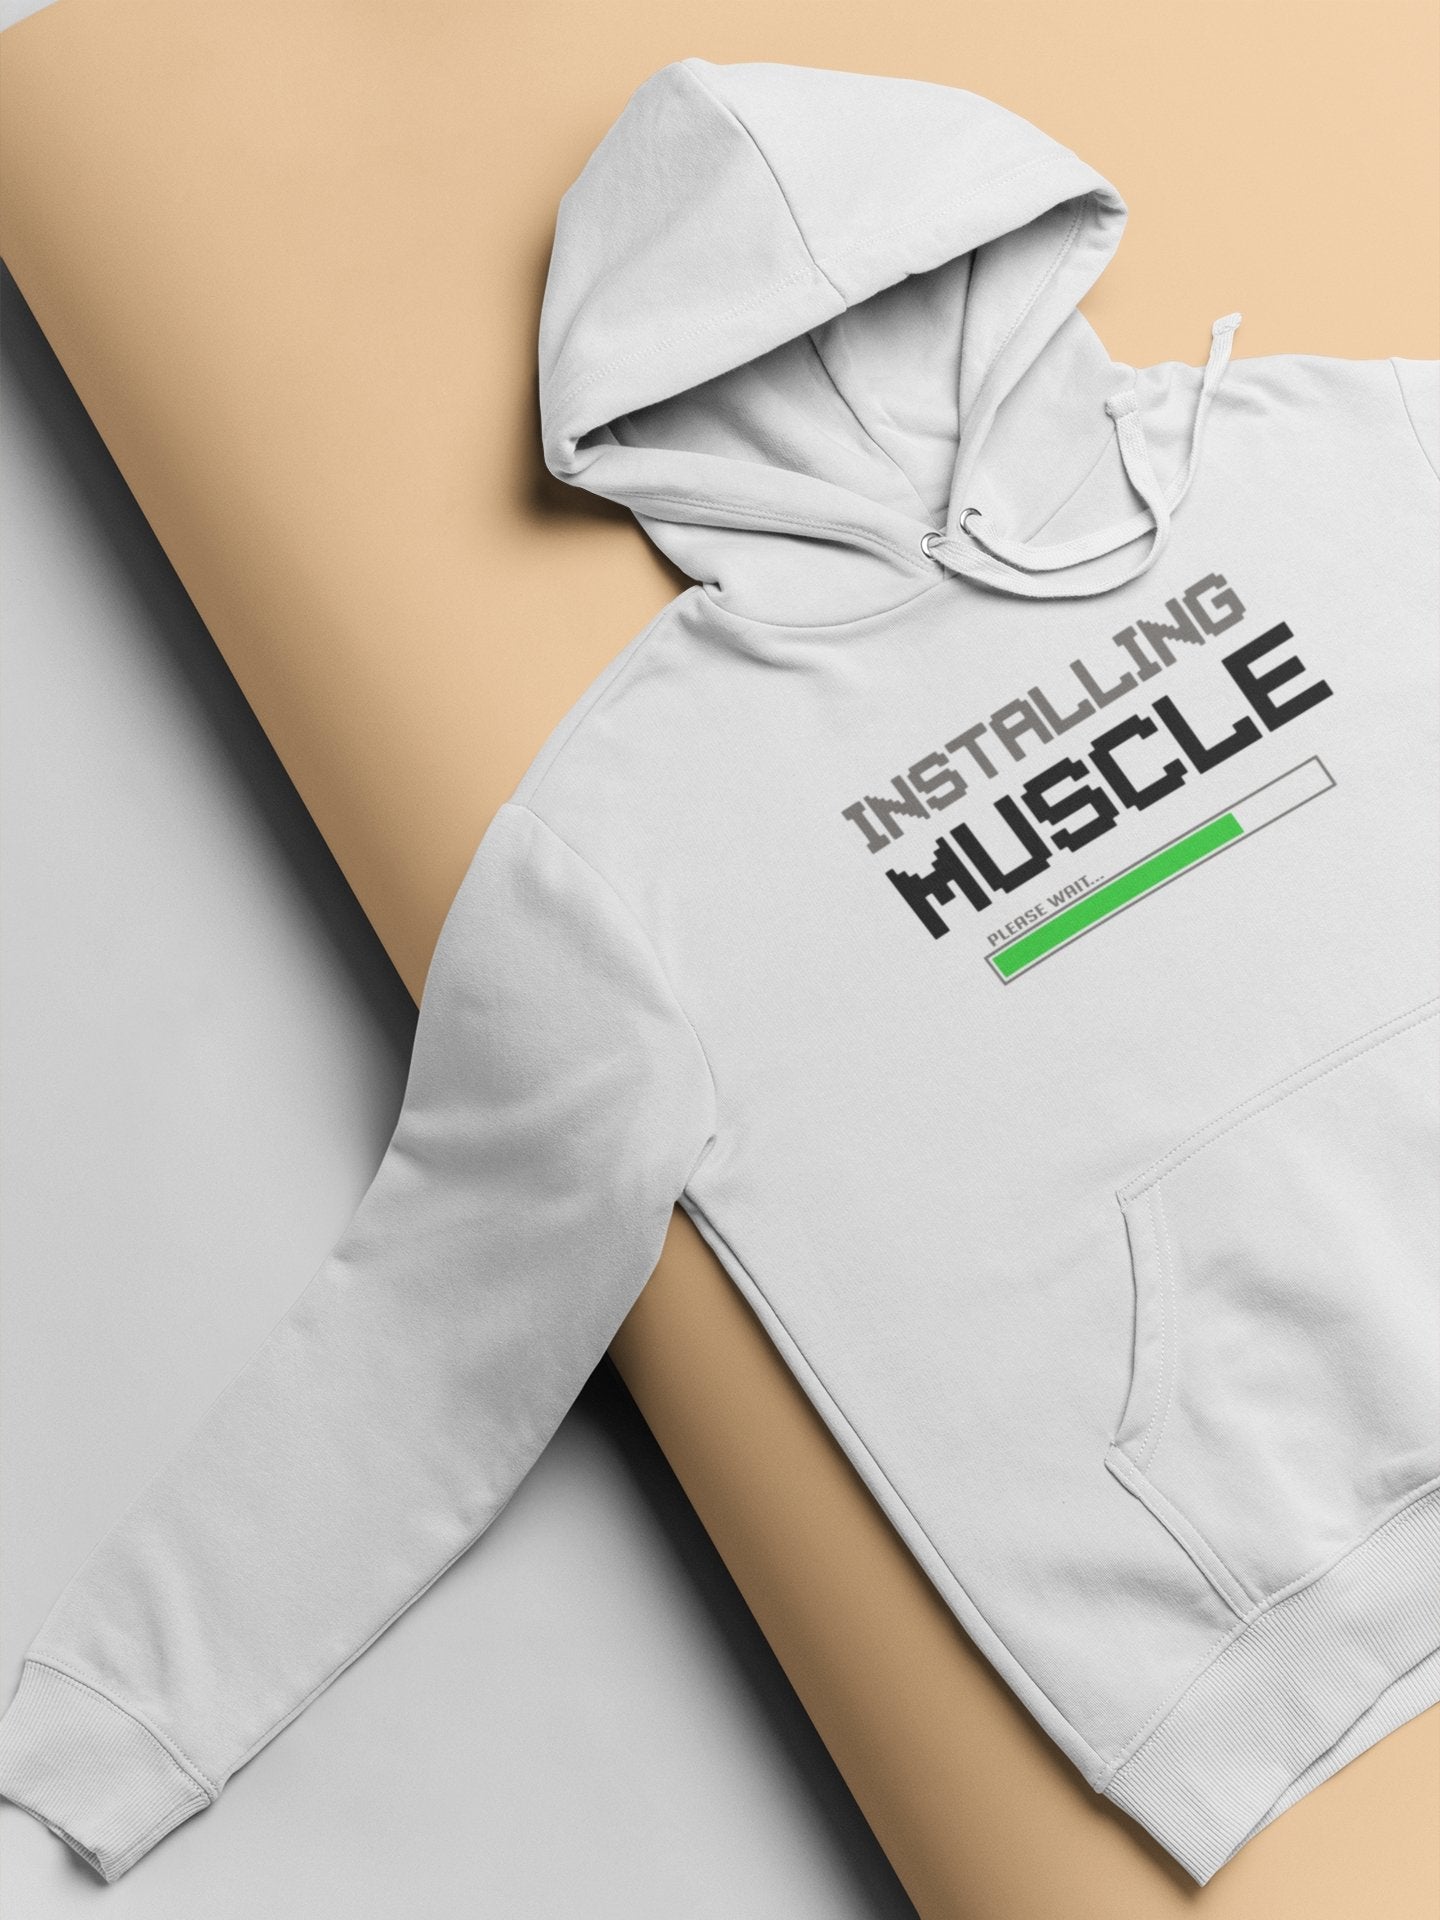 Installing Muscles Gym And Workout Hoodies for Women-FunkyTeesClub - Funky Tees Club